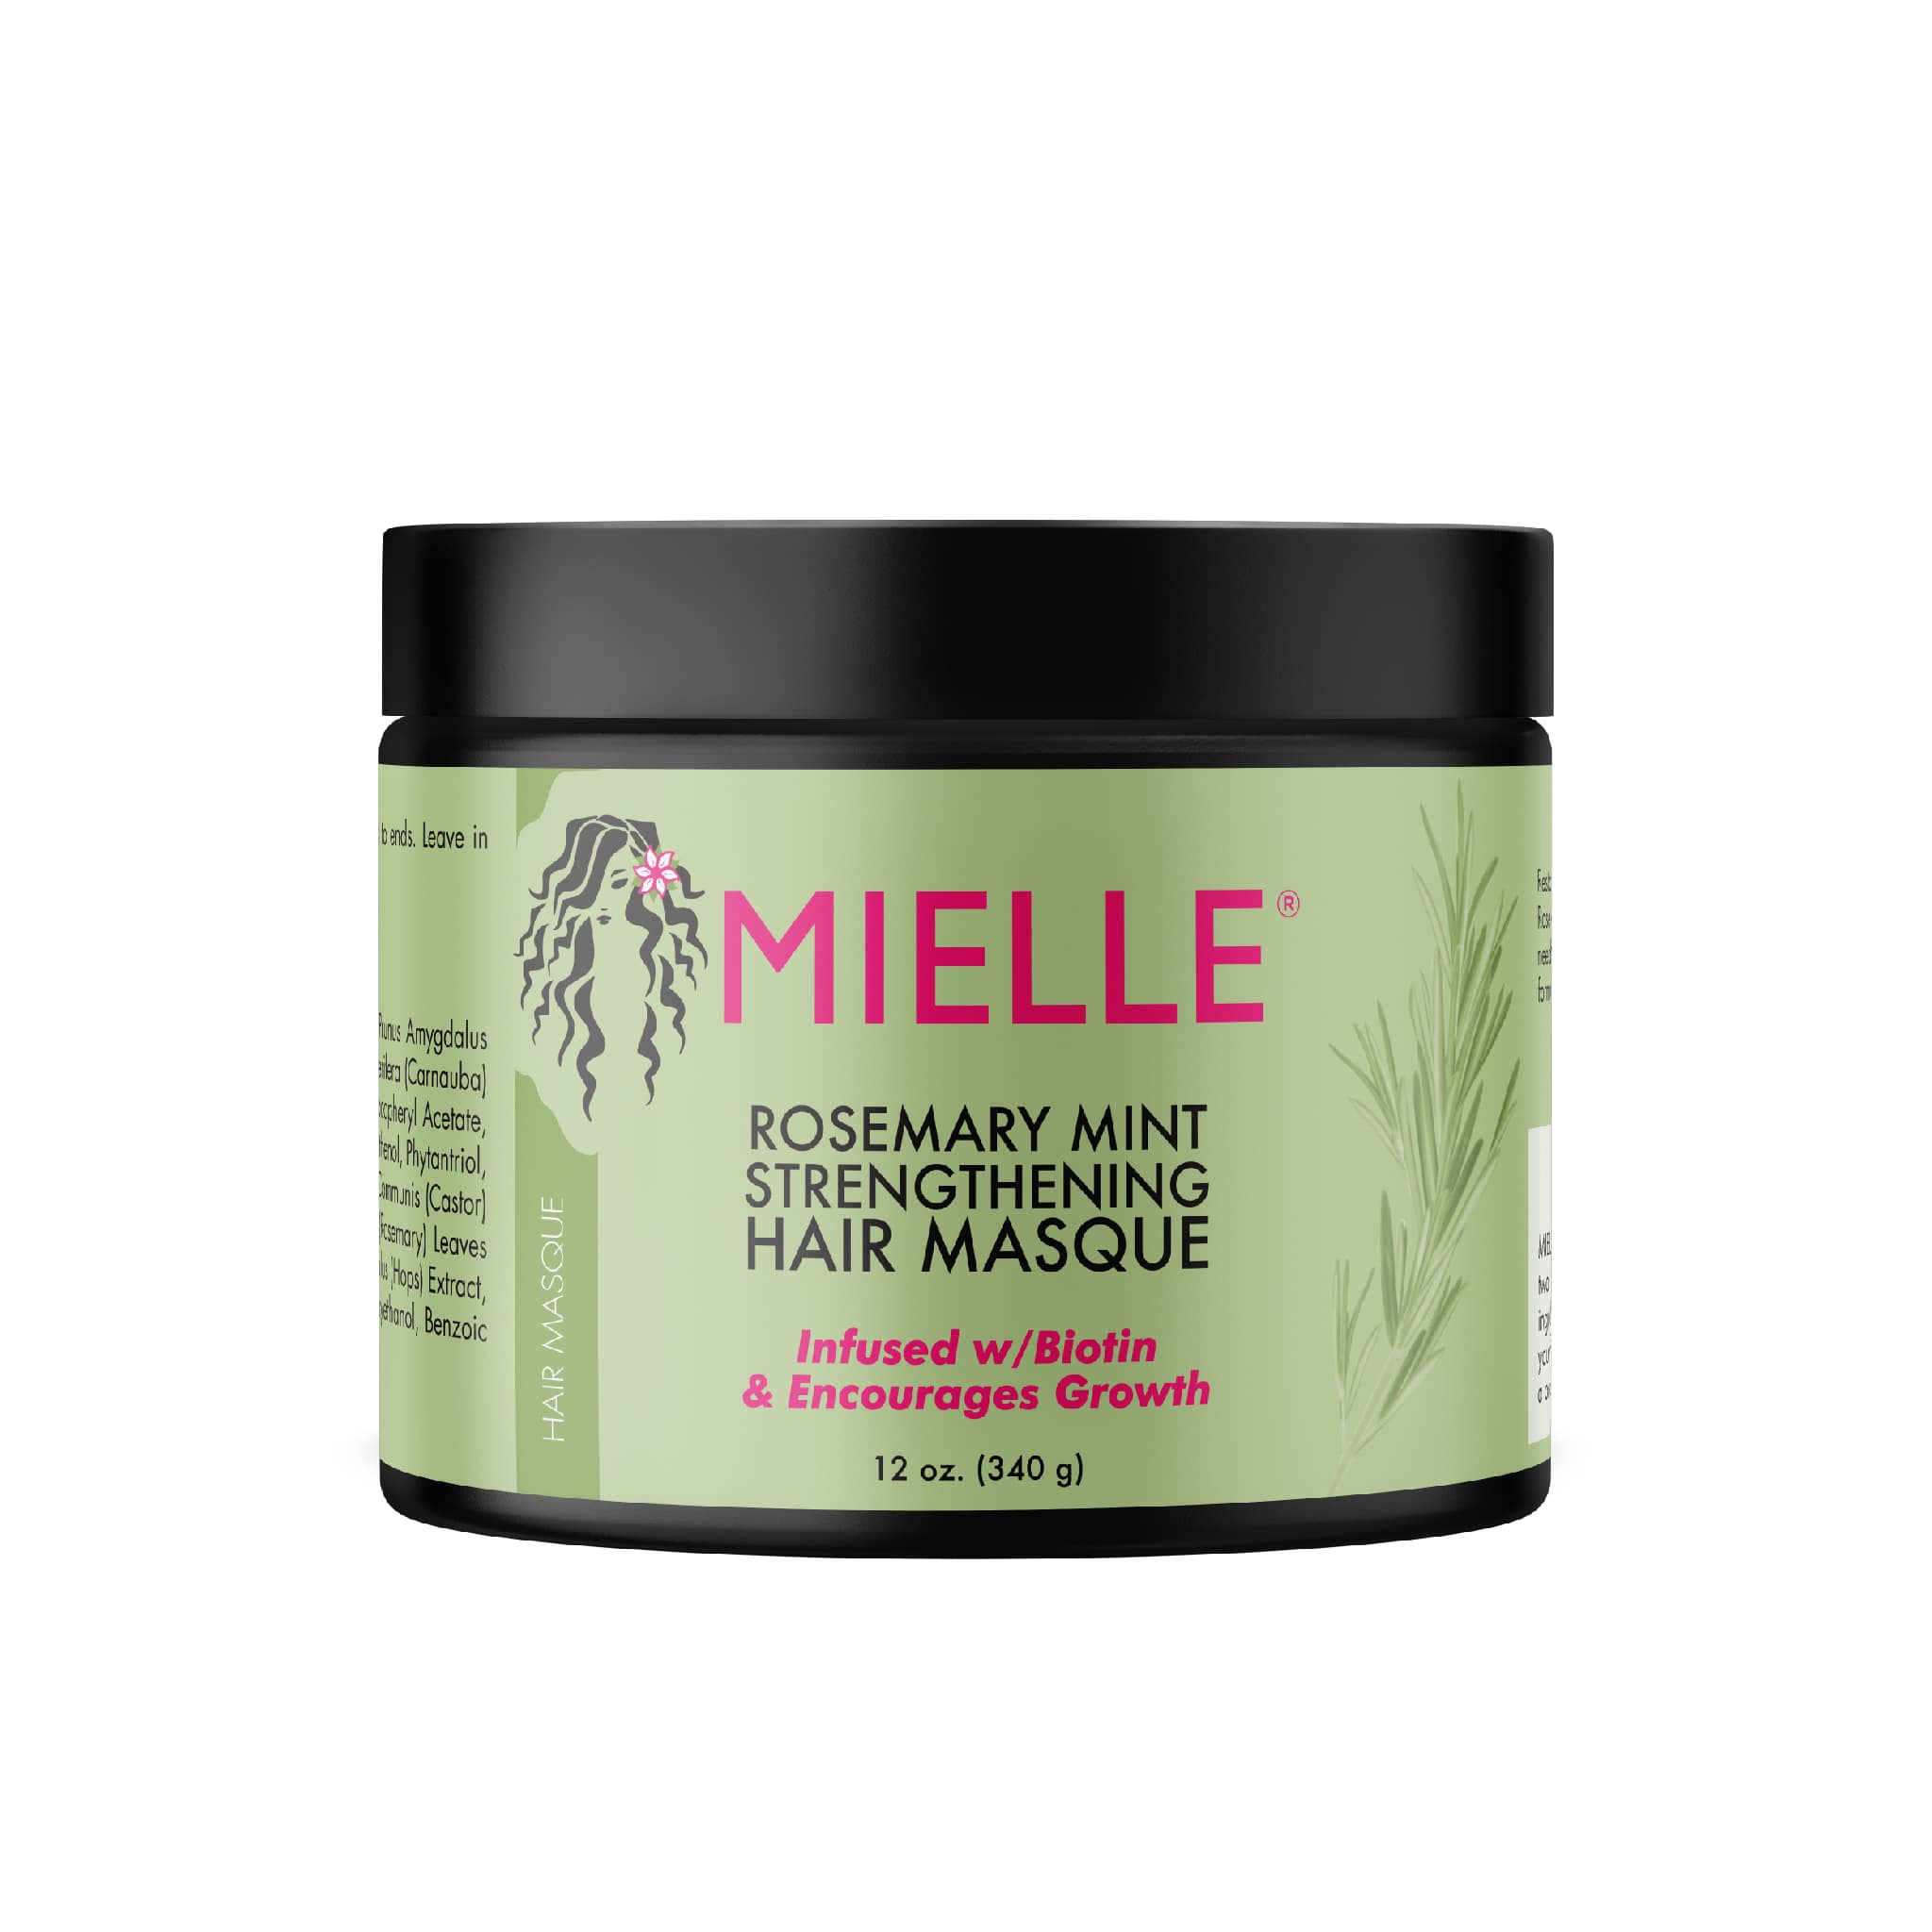 MIELLE - Rosemary Mint Strengthening Hair Masque